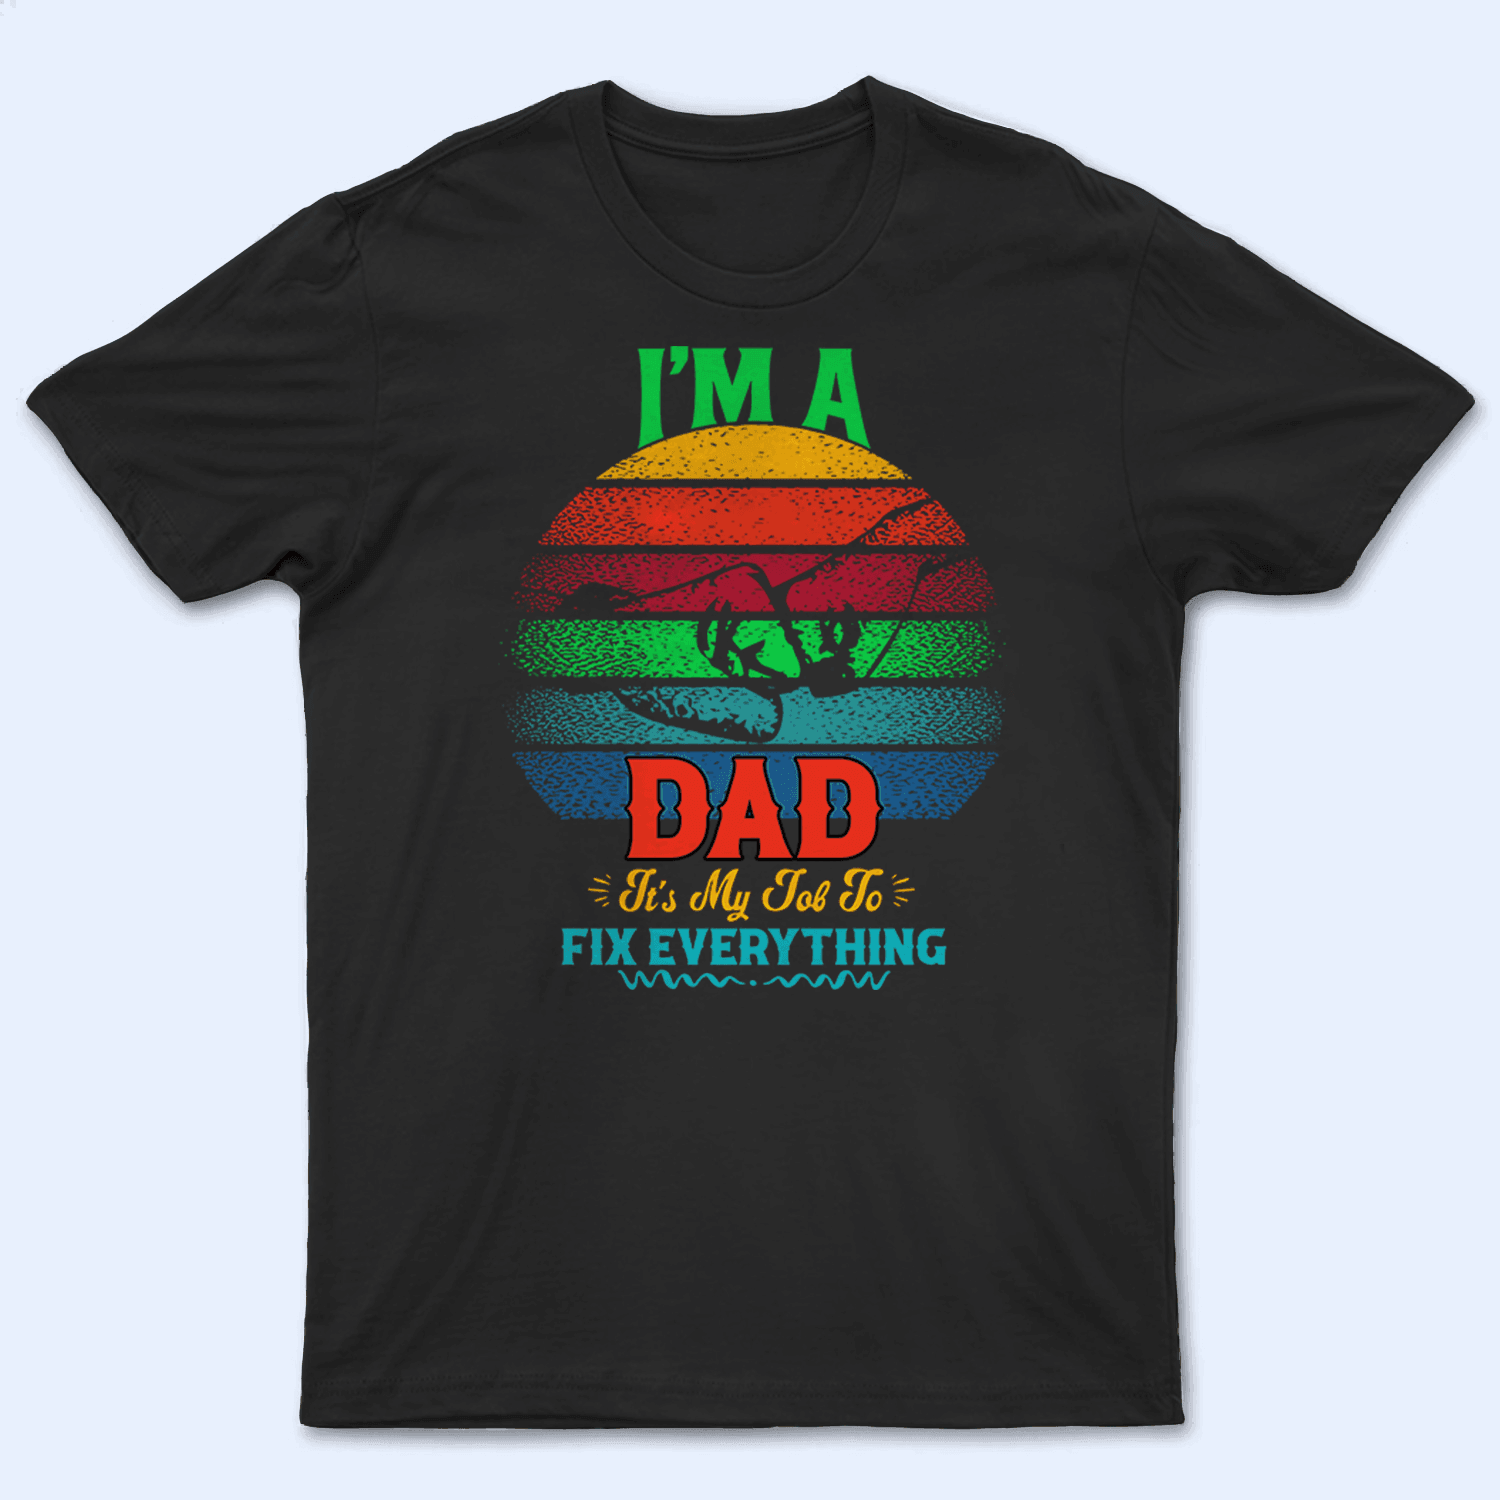 I'm A Dad It's My Job To Fix Everything - Personalized Custom T Shirt - Birthday, Loving, Funny Gift for Grandfather/Dad/Father, Husband, Grandparent - Suzitee Store